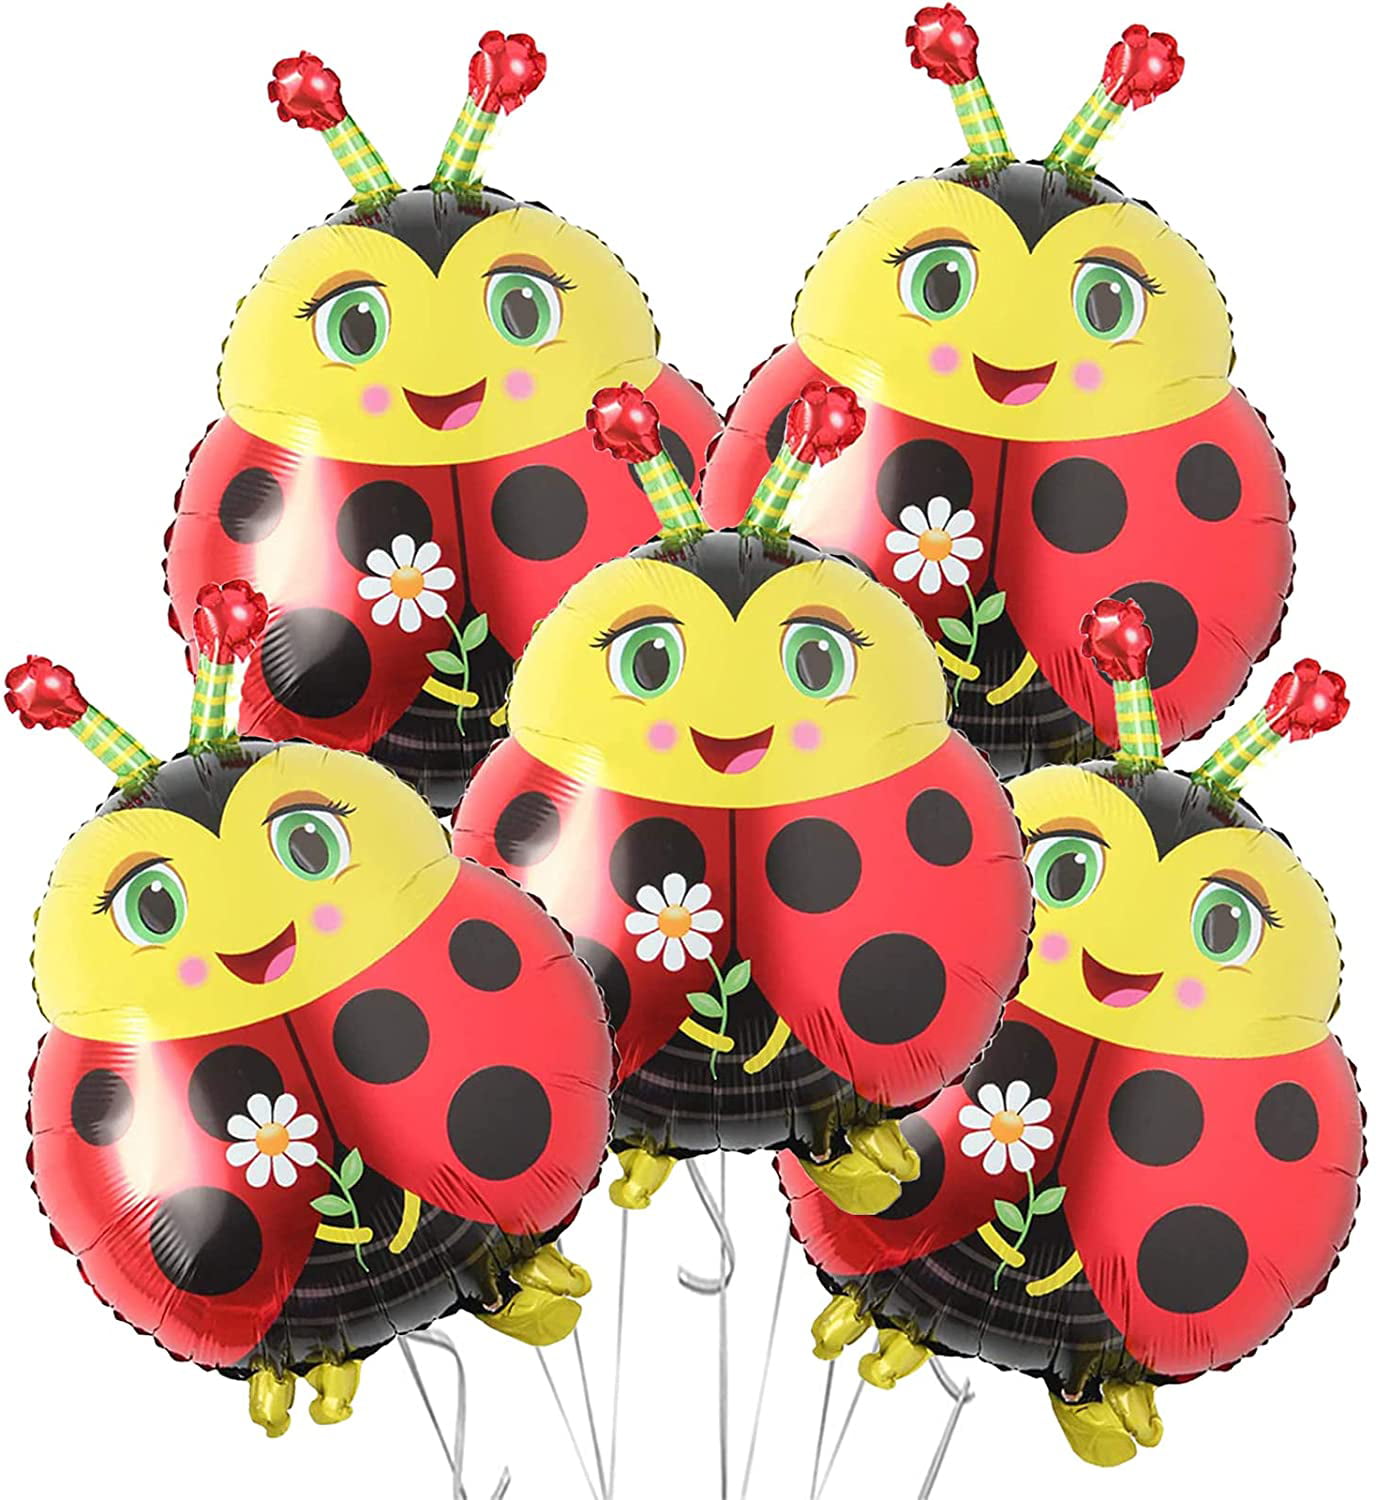 Buy 5Pcs Ladybug Balloons Animal Insect Foil Balloons for Birthday Baby  Shower Ladybug Themed Party Decorations Supplies Online at Lowest Price in  Ubuy Kosovo. 1993563139